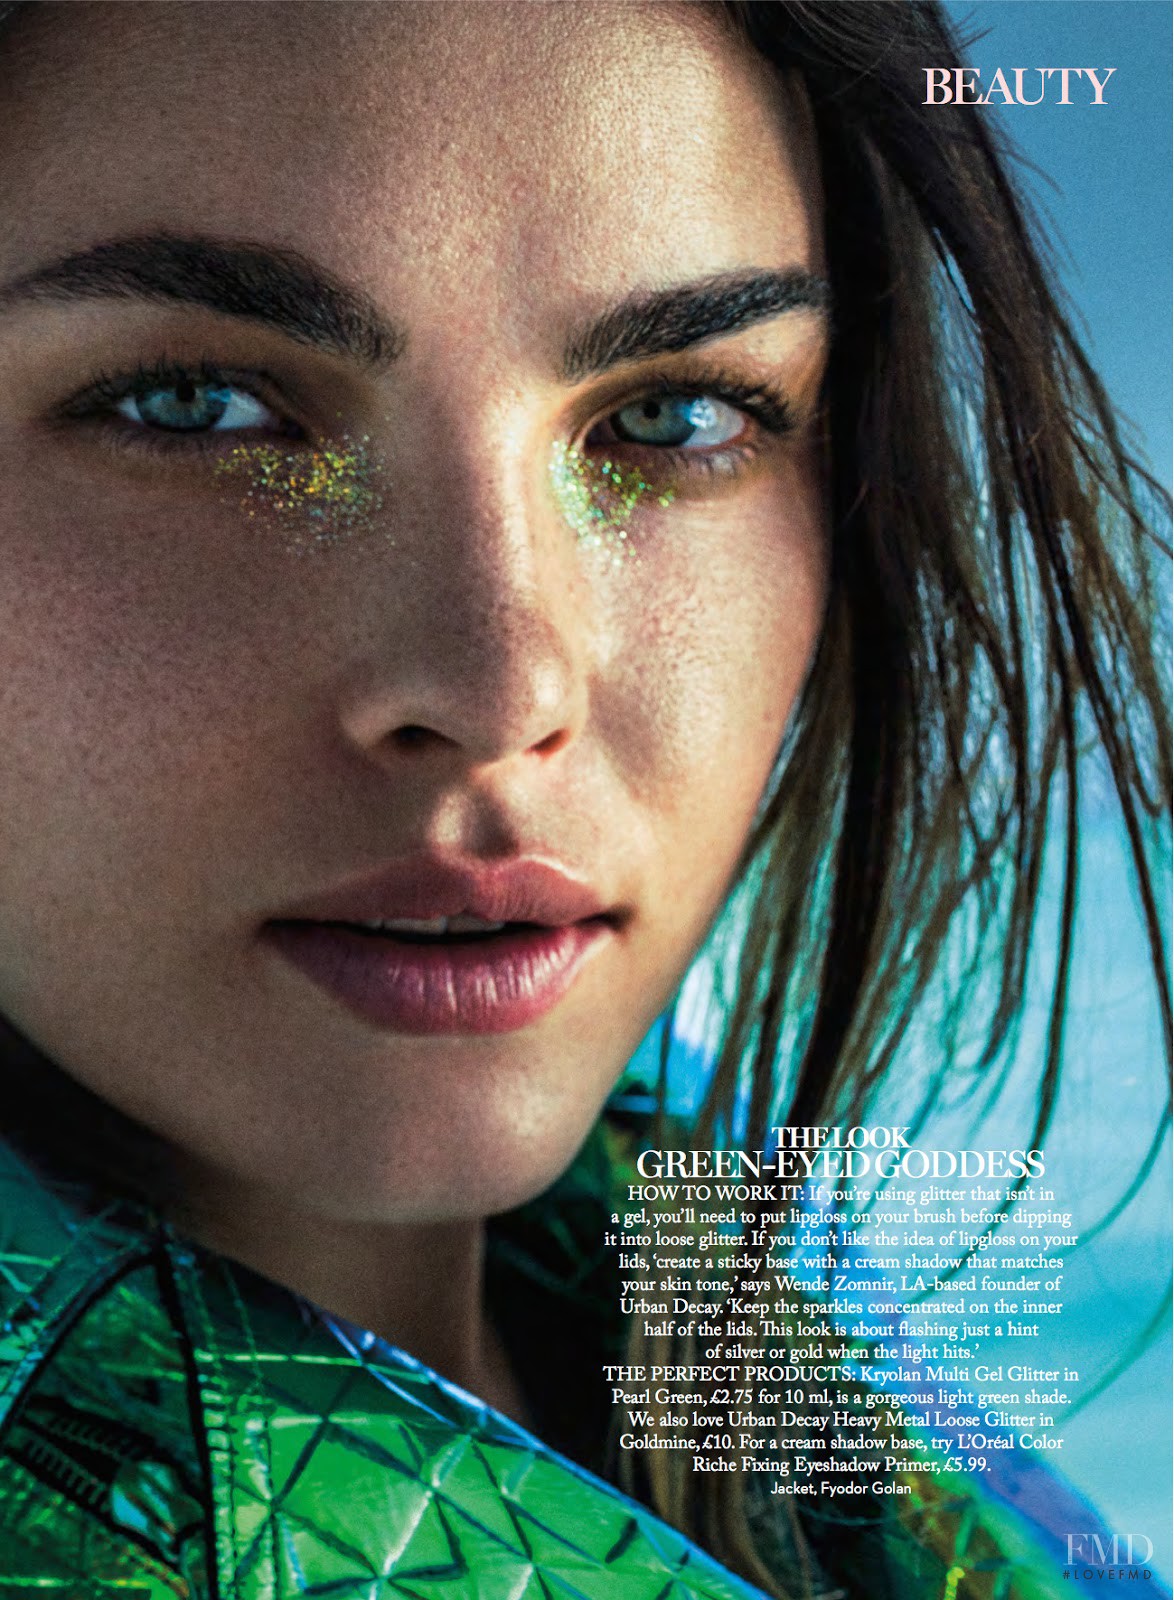 Crystal Clear in Marie Claire UK with Bambi Northwood-Blyth wearing L ...